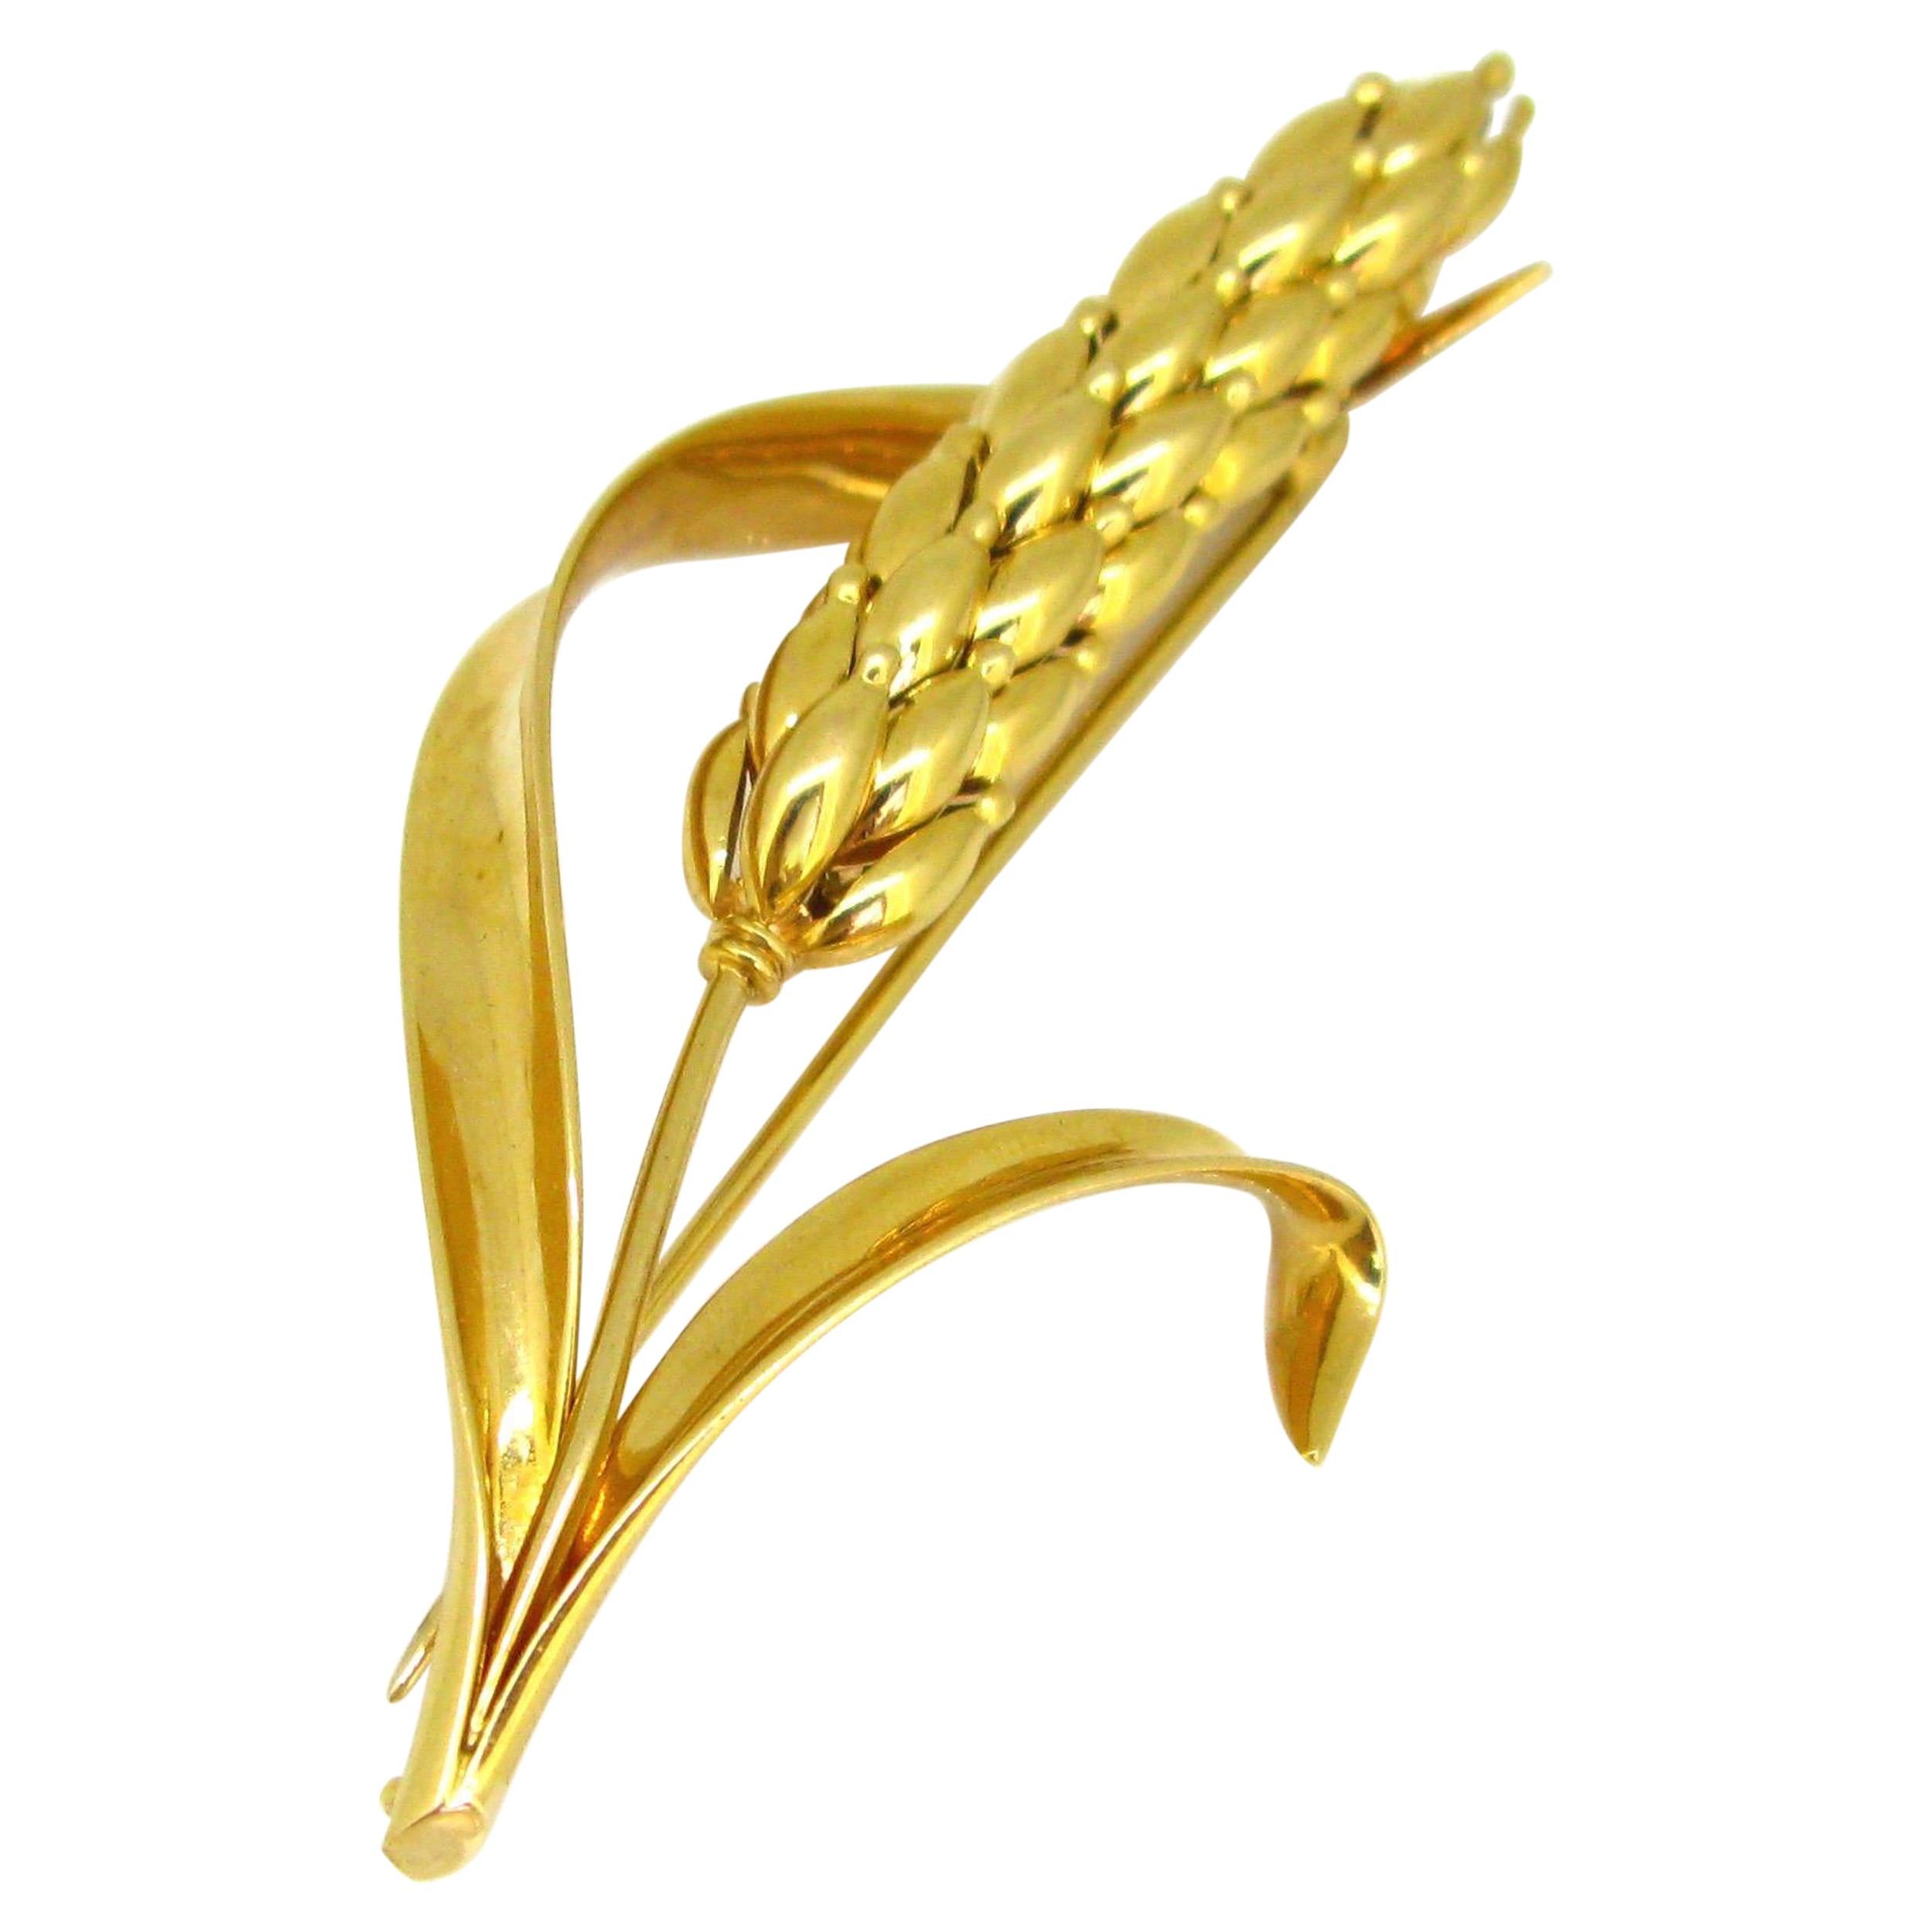 Retro Sheaf of Wheat Pin Brooch by Bettetini, 18kt Yellow Gold, France, circa 19